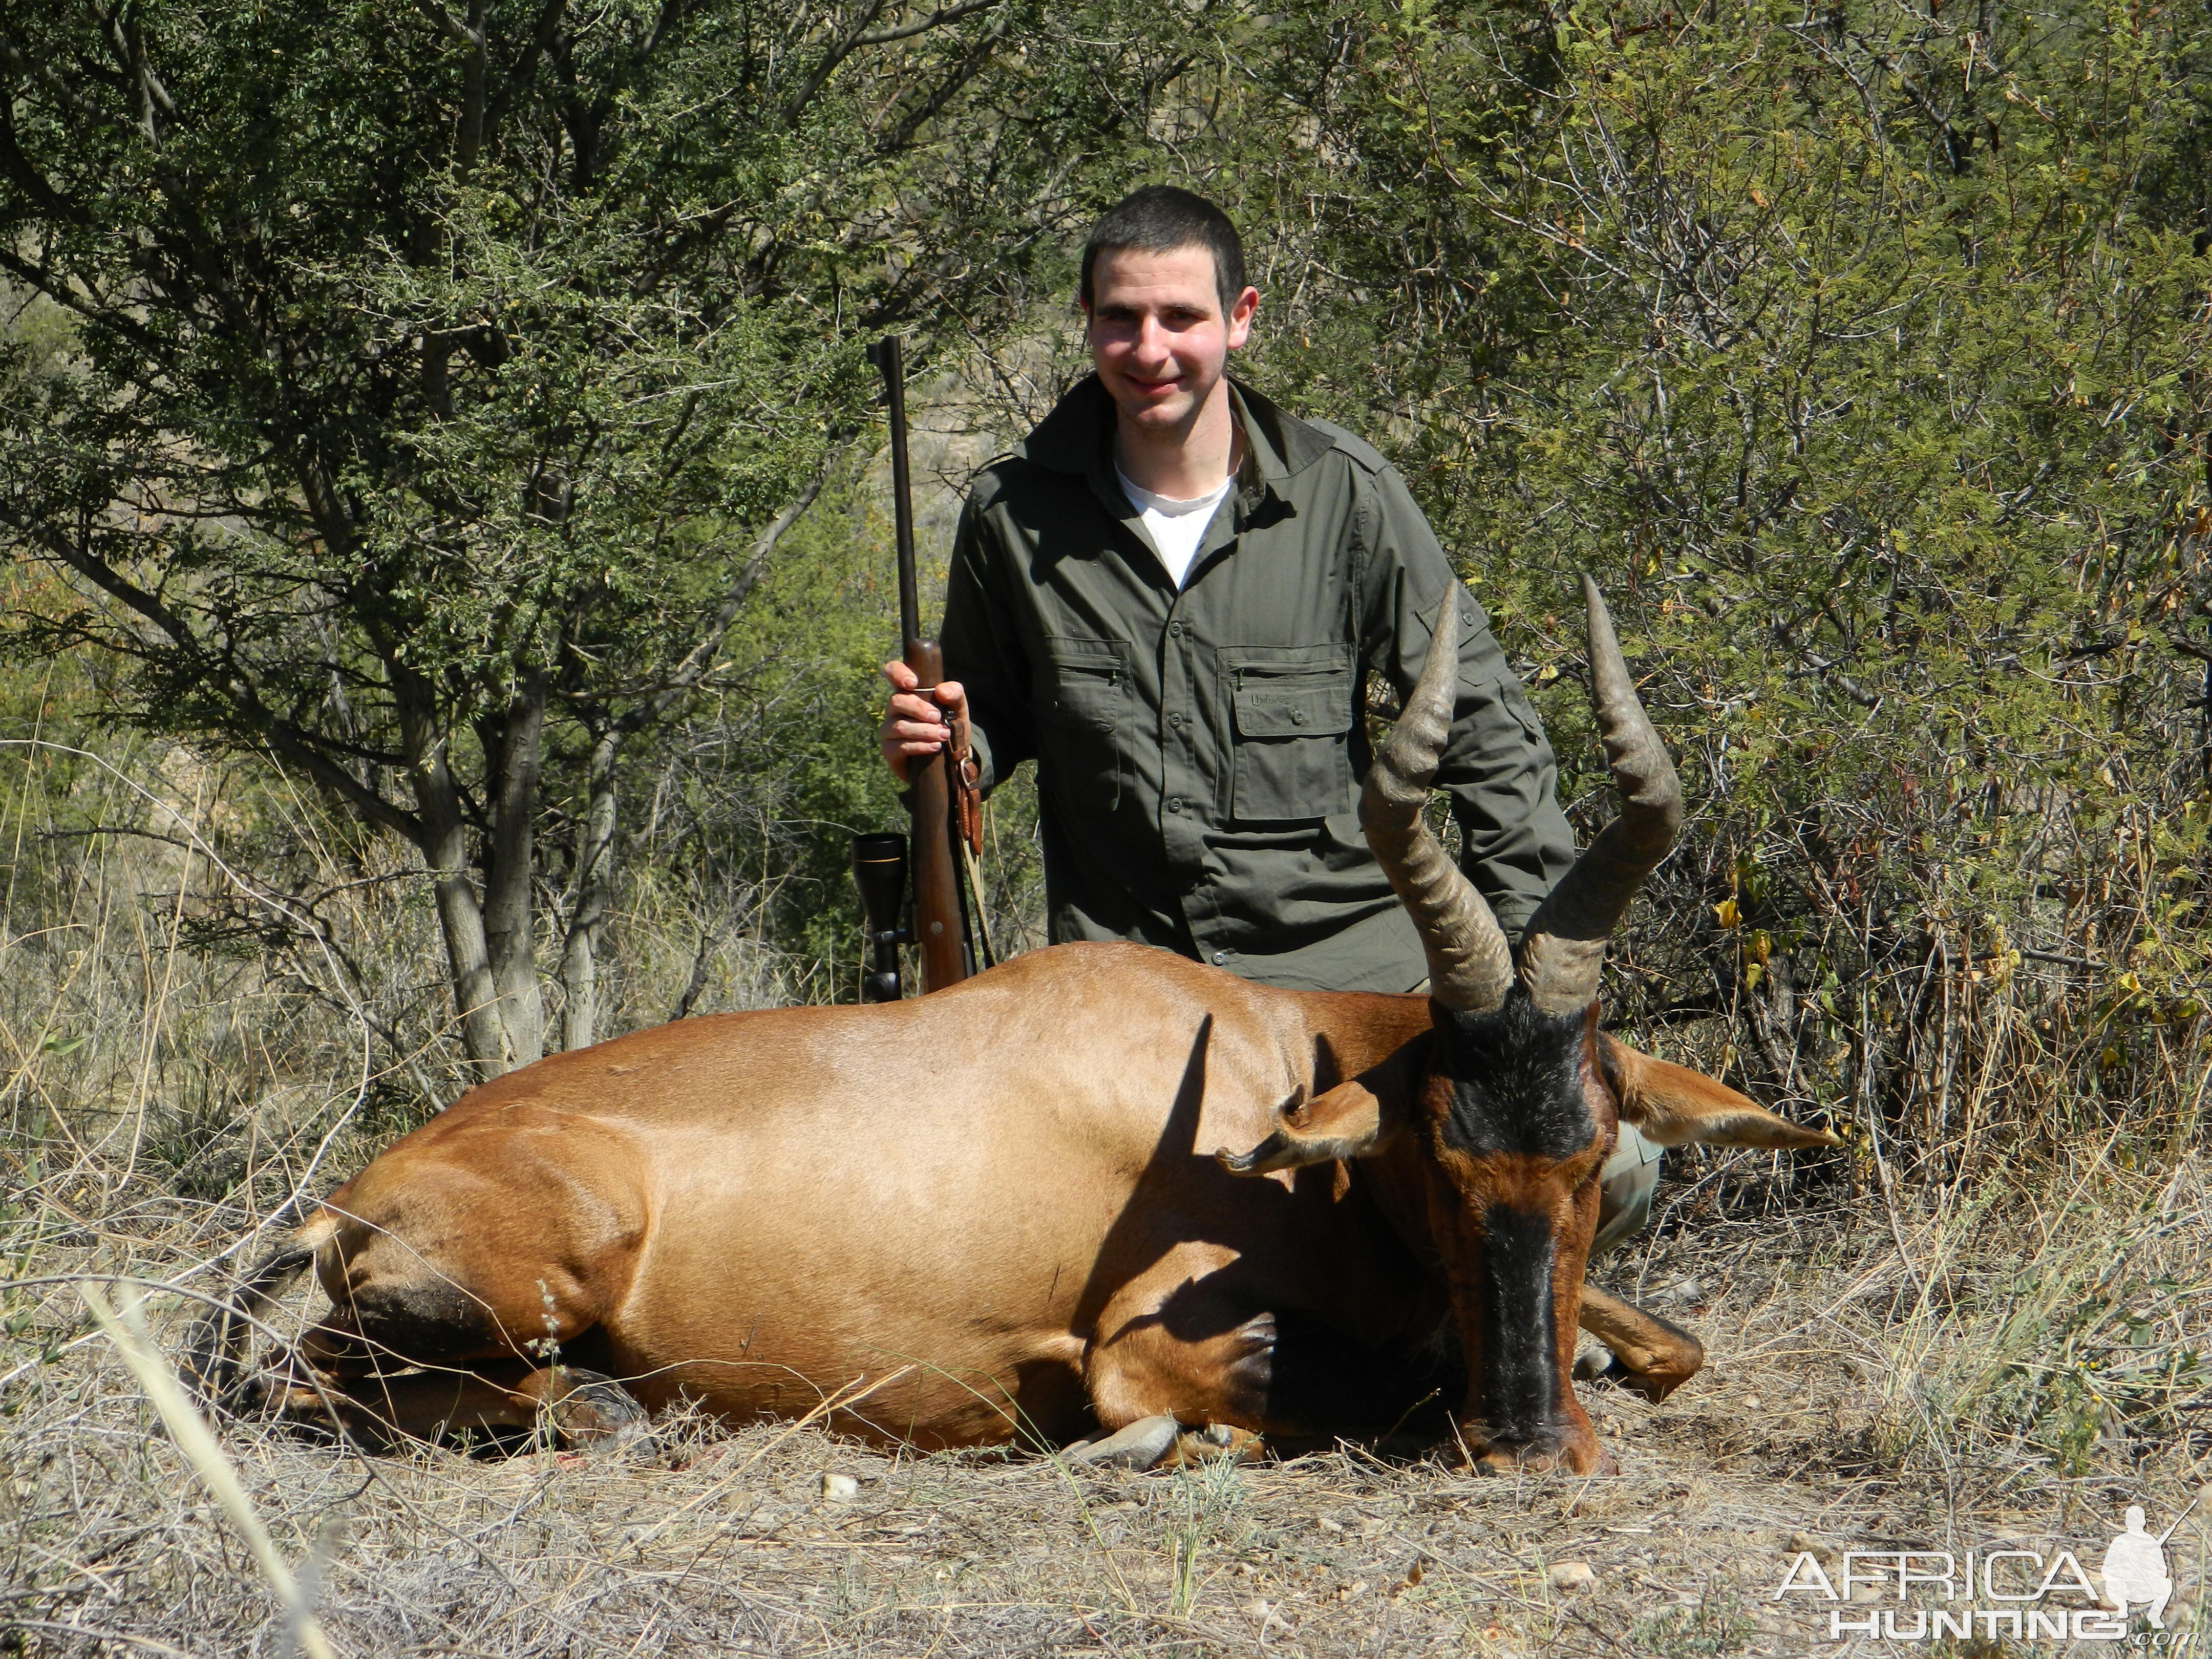 Red Hartebeest from Namibia